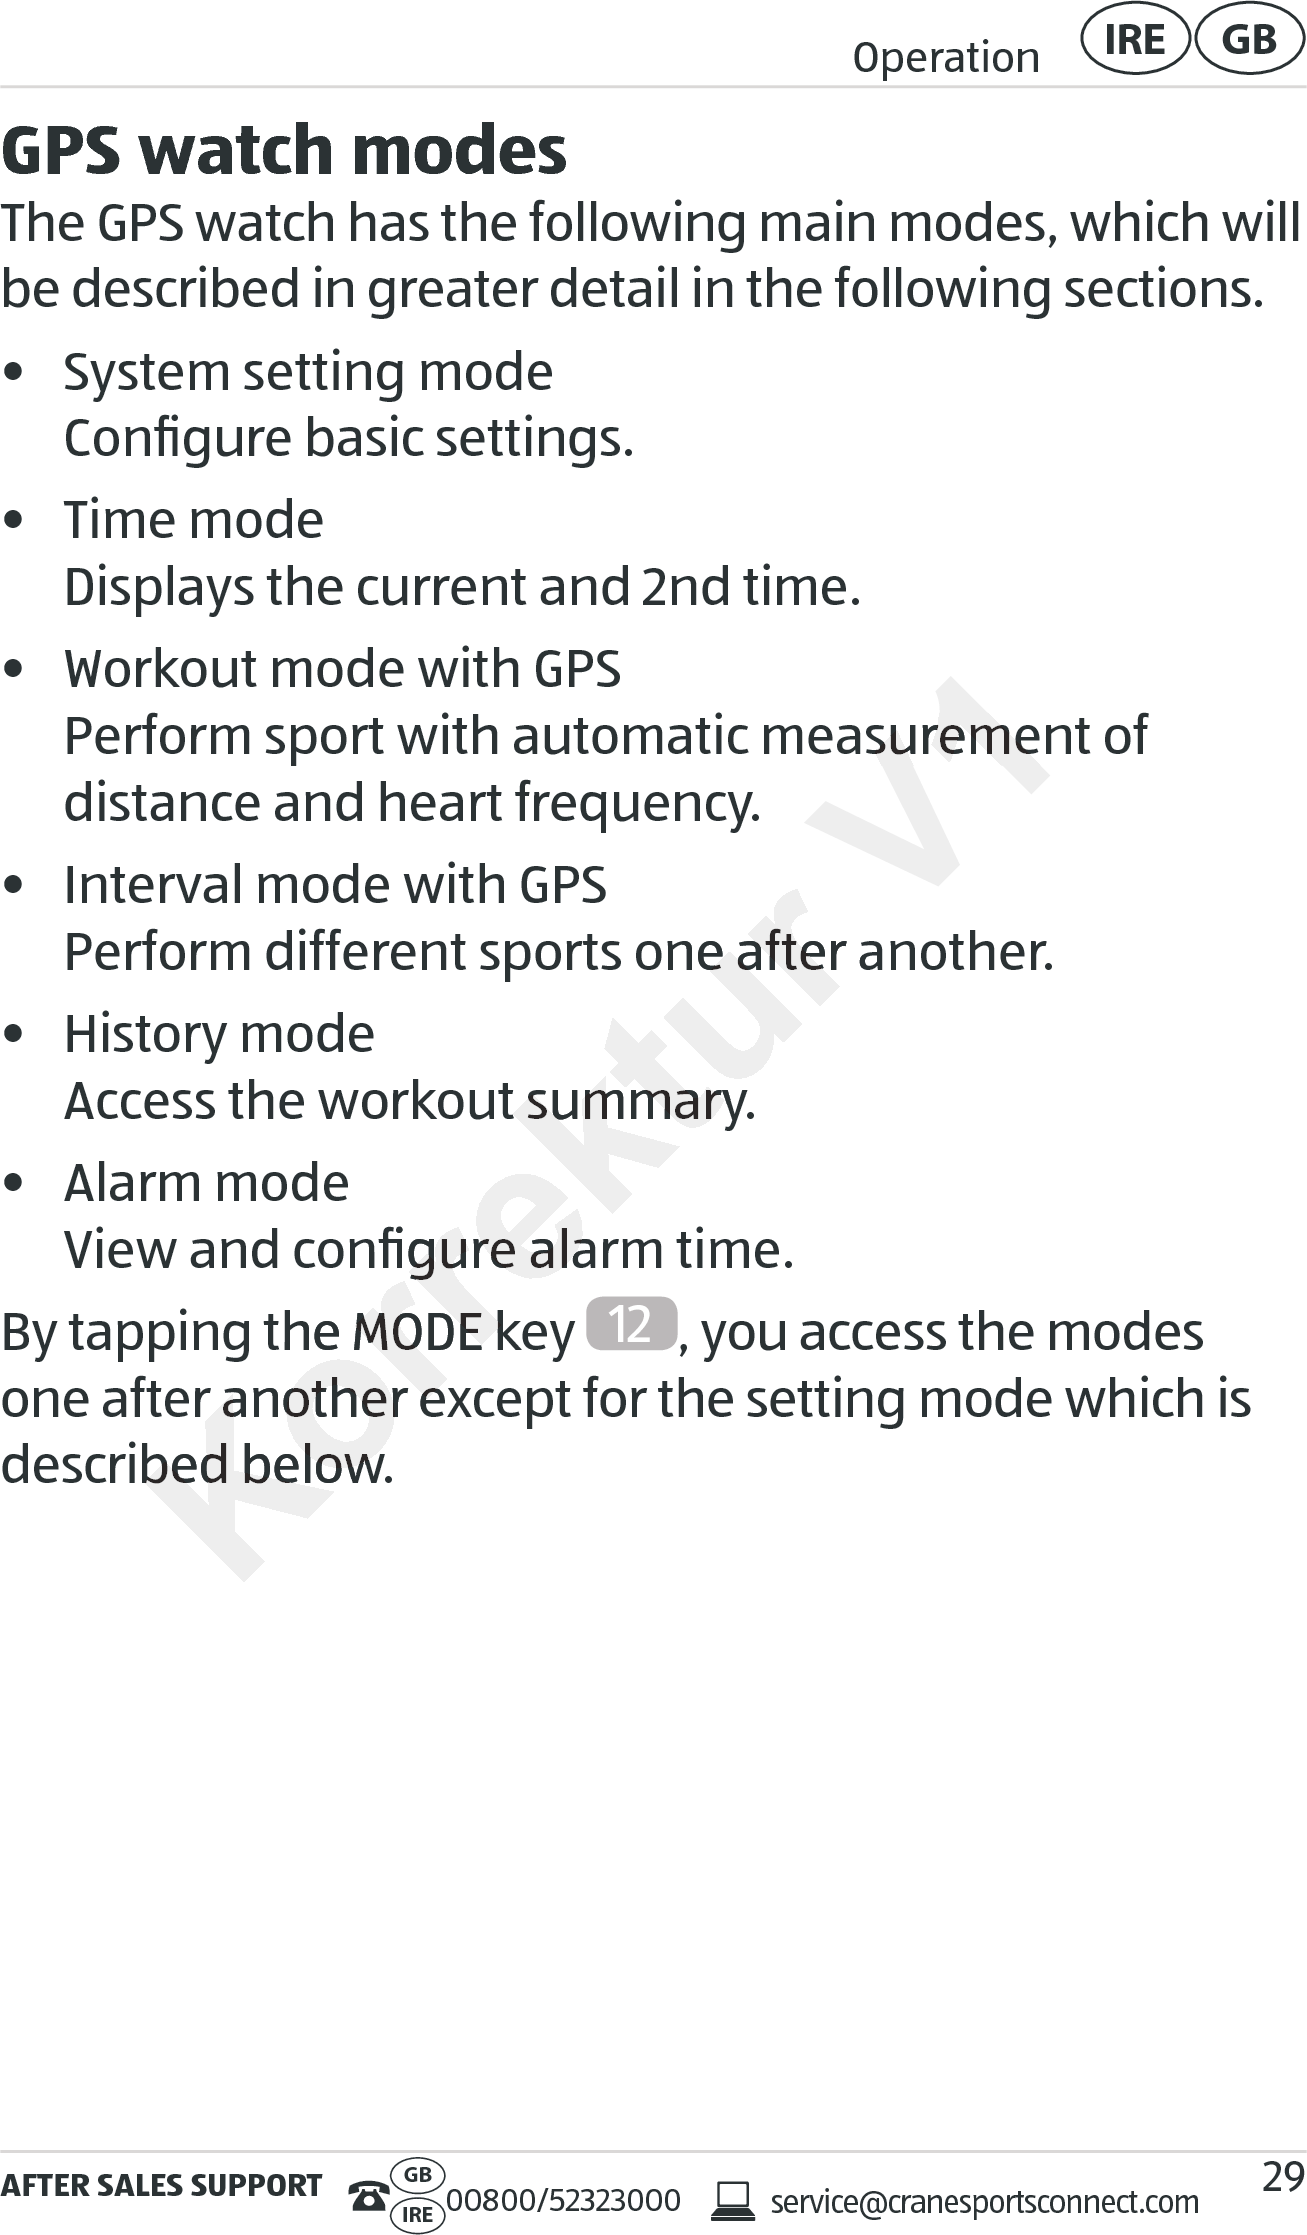 AFTER SALES SUPPORTservice@cranesportsconnect.comGBIRE 00800/52323000Operation GBIRE29GPS watch modesThe GPS watch has the following main modes, which will be described in greater detail in the following sections.•  System setting mode Conﬁgure basic settings.•  Time mode Displays the current and 2nd time.•  Workout mode with GPS Perform sport with automatic measurement of  distance and heart frequency.•  Interval mode with GPS Perform different sports one after another.•  History mode Access the workout summary.•  Alarm mode View and conﬁgure alarm time.By tapping the MODE key  12 , you access the modes one after another except for the setting mode which is described below.Perform different sports one after another.Perform different sports one after another.out summary.out summary.View and conﬁgurView and conﬁgure alarm time.e alarm time.By tapping the MODE key By tapping the MODE key one after another except for the setting mode which is one after another except for the setting mode which is described below.described below.V1Perform sport with automatic measurement of  Perform sport with automatic measurement of  